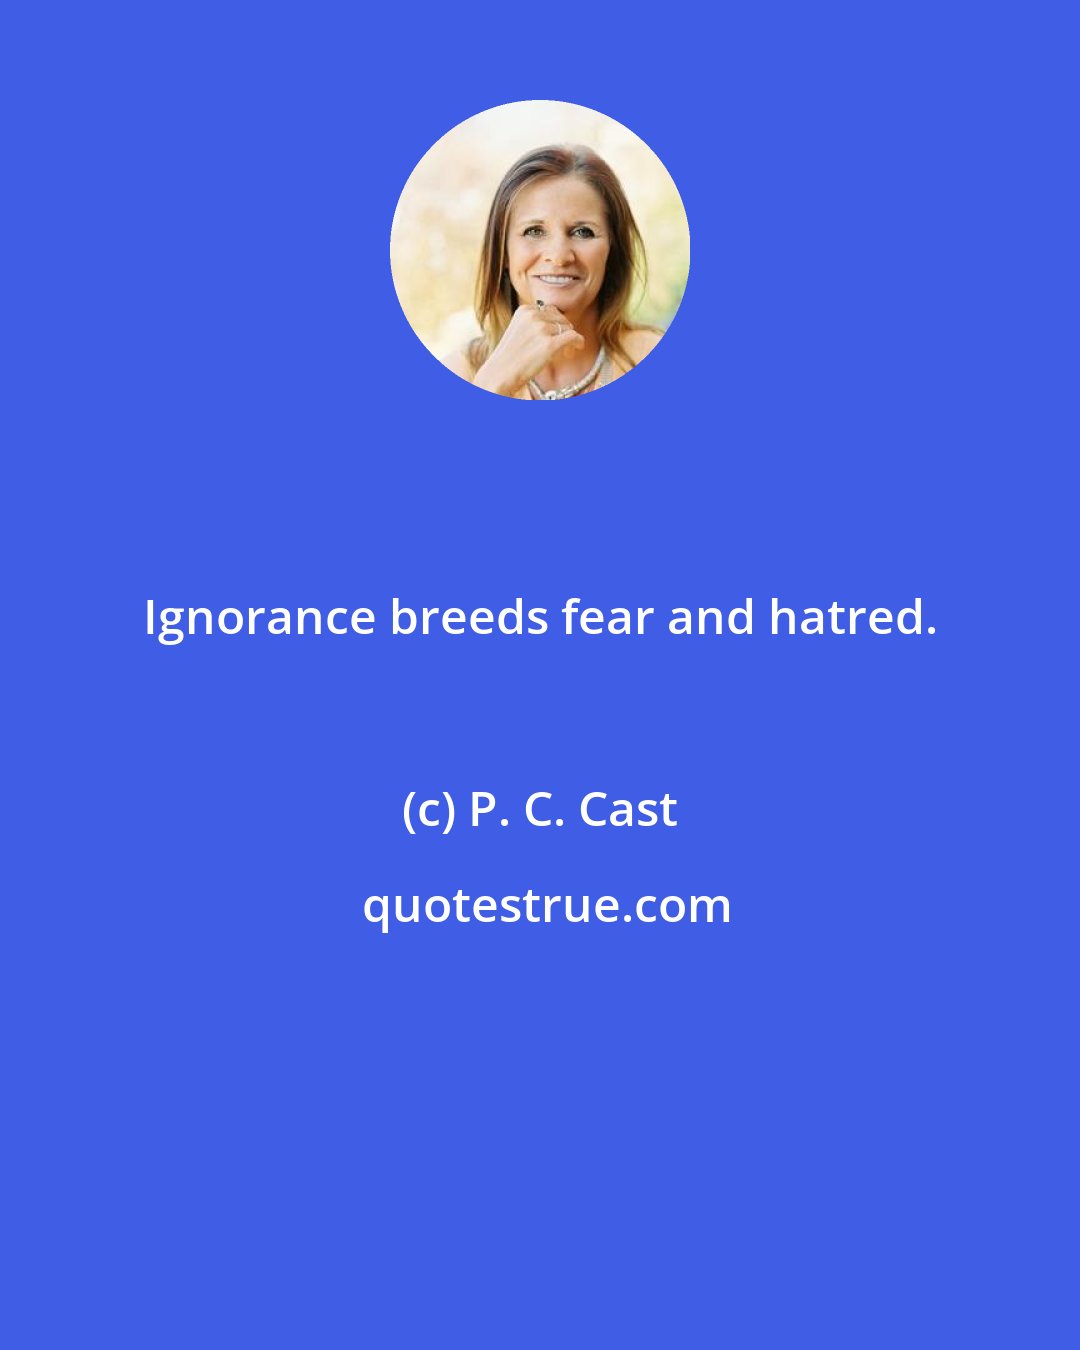 P. C. Cast: Ignorance breeds fear and hatred.